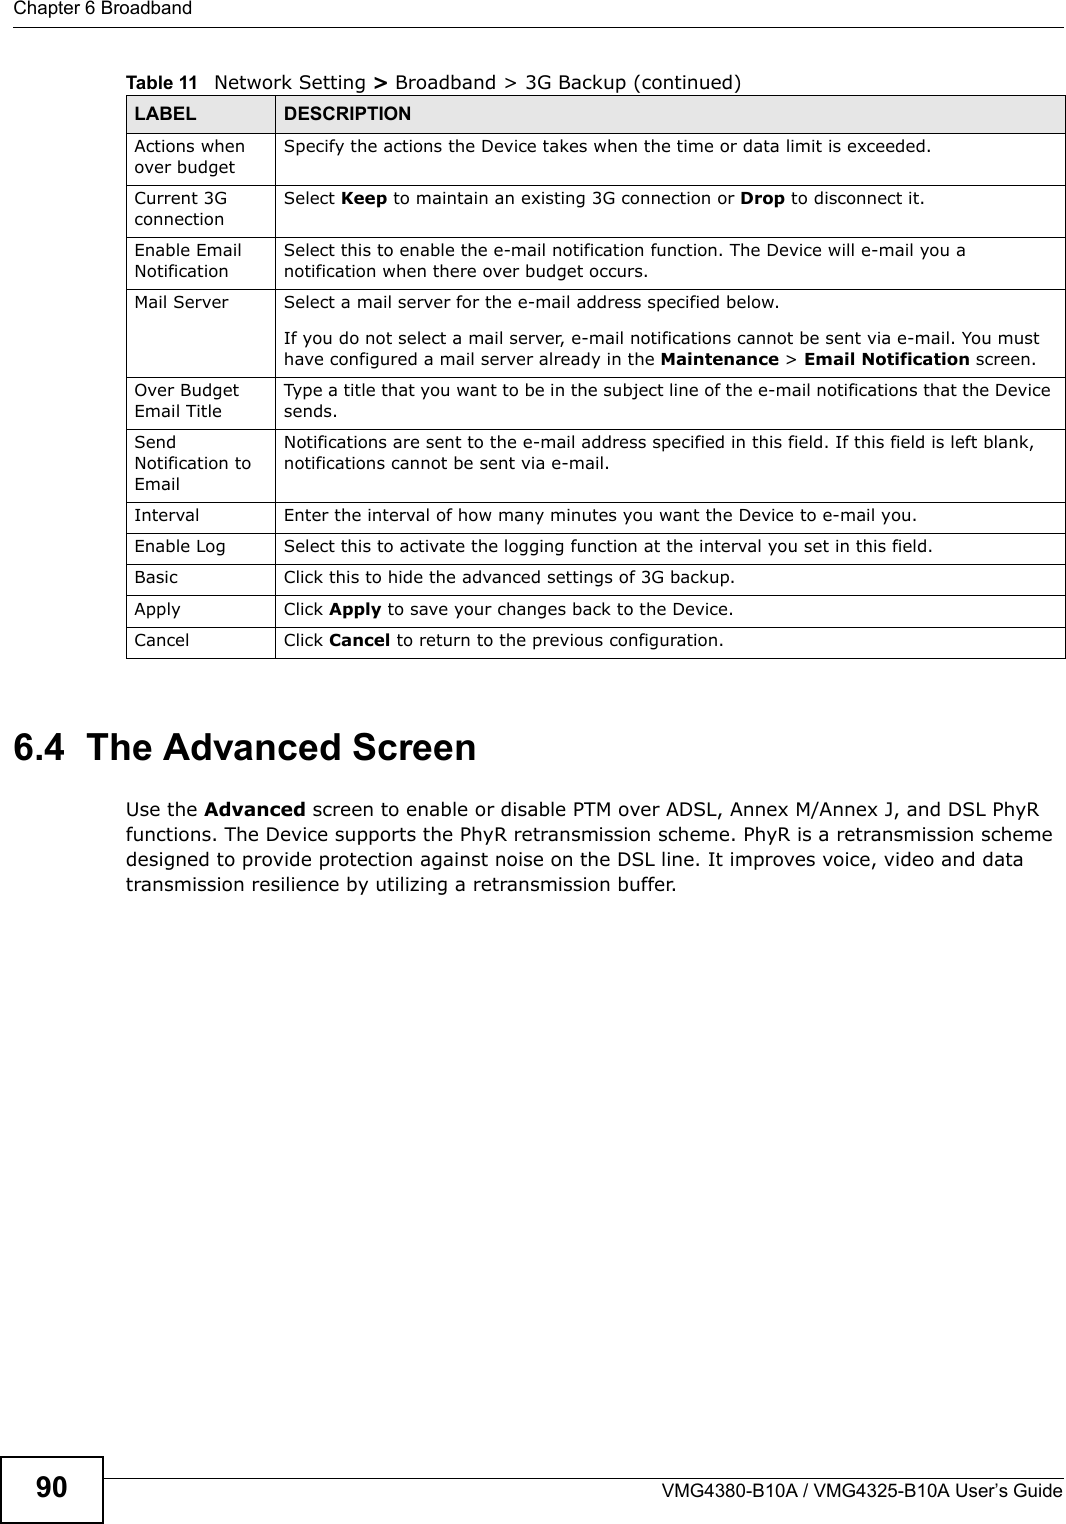 Chapter 6 BroadbandVMG4380-B10A / VMG4325-B10A User’s Guide906.4  The Advanced ScreenUse the Advanced screen to enable or disable PTM over ADSL, Annex M/Annex J, and DSL PhyR functions. The Device supports the PhyR retransmission scheme. PhyR is a retransmission scheme designed to provide protection against noise on the DSL line. It improves voice, video and data transmission resilience by utilizing a retransmission buffer.Actions whenover budgetSpecify the actions the Device takes when the time or data limit is exceeded. Current 3G connection Select Keep to maintain an existing 3G connection or Drop to disconnect it. Enable Email NotificationSelect this to enable the e-mail notification function. The Device will e-mail you a notification when there over budget occurs.Mail Server Select a mail server for the e-mail address specified below.If you do not select a mail server, e-mail notifications cannot be sent via e-mail. You musthave configured a mail server already in the Maintenance &gt; Email Notification screen.Over Budget Email TitleType a title that you want to be in the subject line of the e-mail notifications that the Devicesends.SendNotification to EmailNotifications are sent to the e-mail address specified in this field. If this field is left blank, notifications cannot be sent via e-mail.Interval Enter the interval of how many minutes you want the Device to e-mail you.Enable Log Select this to activate the logging function at the interval you set in this field. Basic Click this to hide the advanced settings of 3G backup.Apply Click Apply to save your changes back to the Device.Cancel Click Cancel to return to the previous configuration.Table 11 Network Setting &gt; Broadband &gt; 3G Backup (continued)LABEL DESCRIPTION